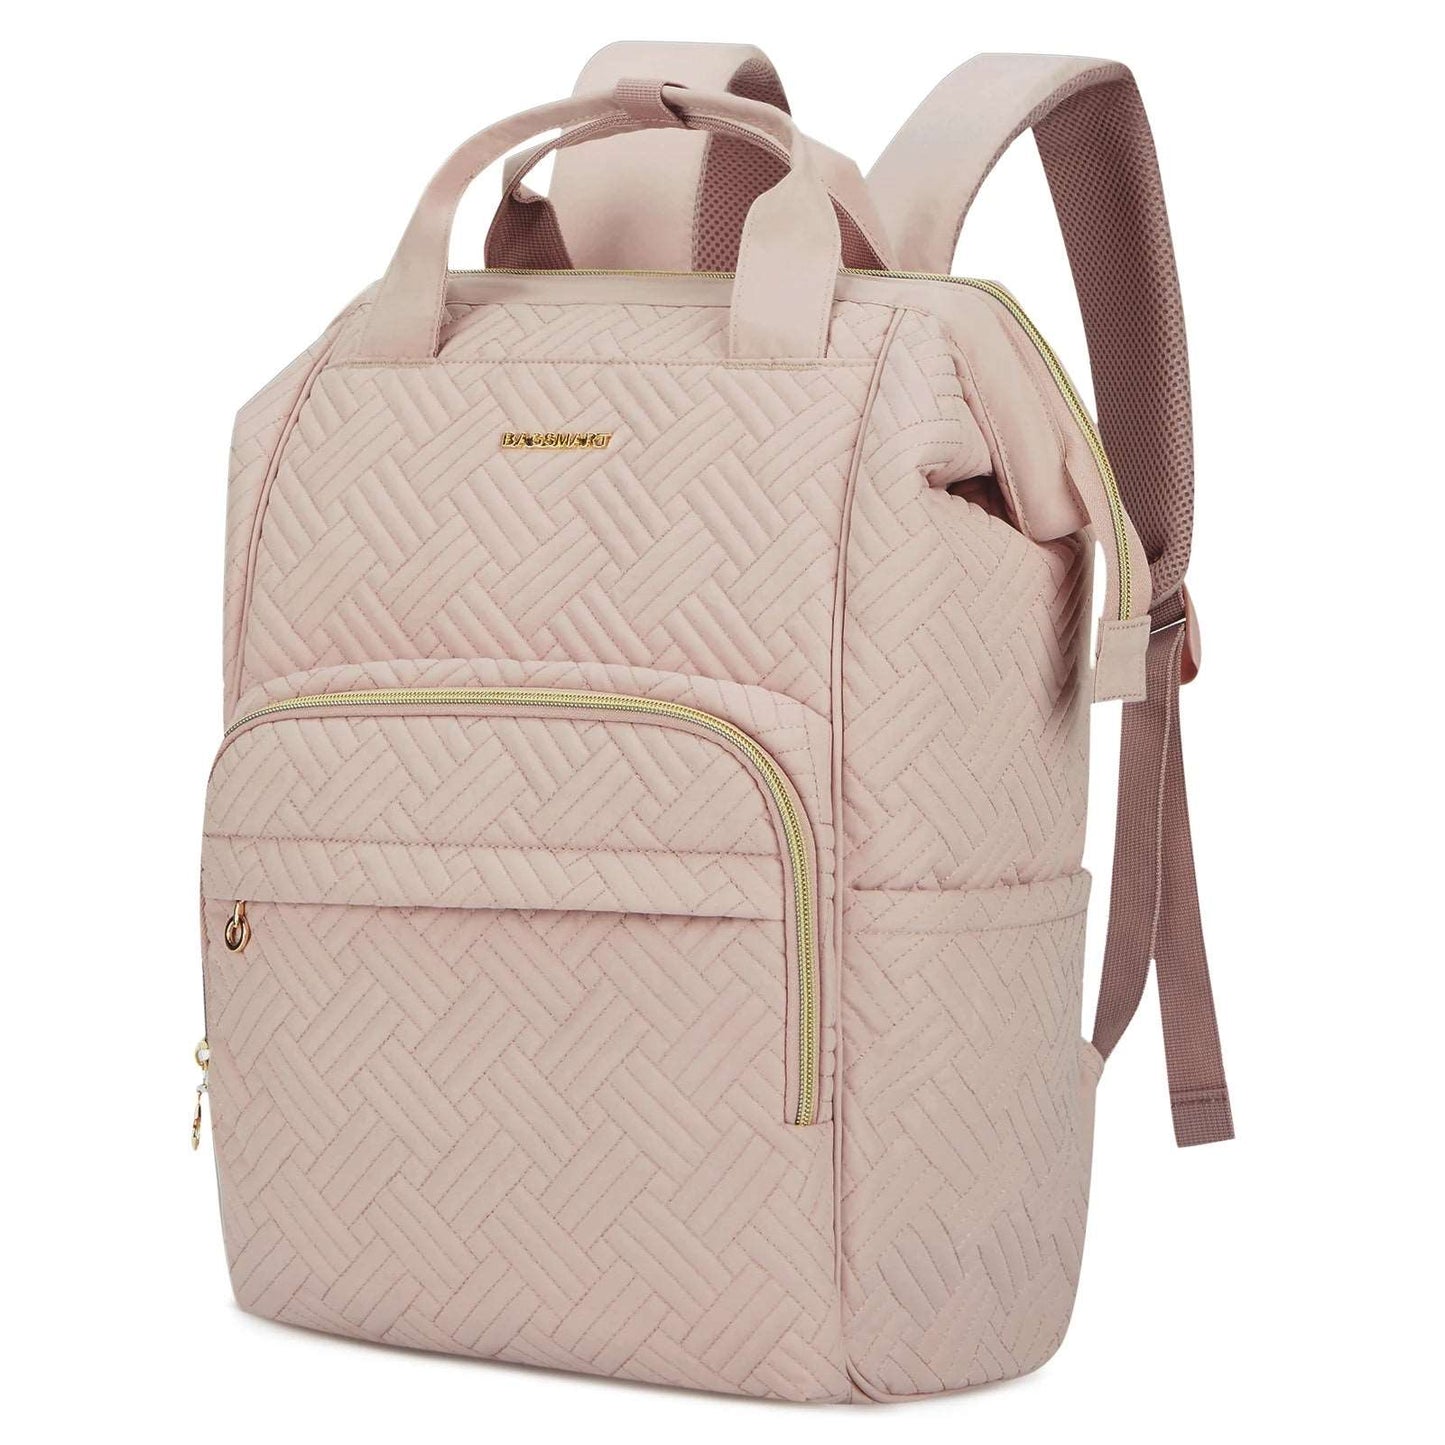 BAGSMART 50L School Bags 14-15.6inch Laptop Backpack for Women 15.6 inch pink2